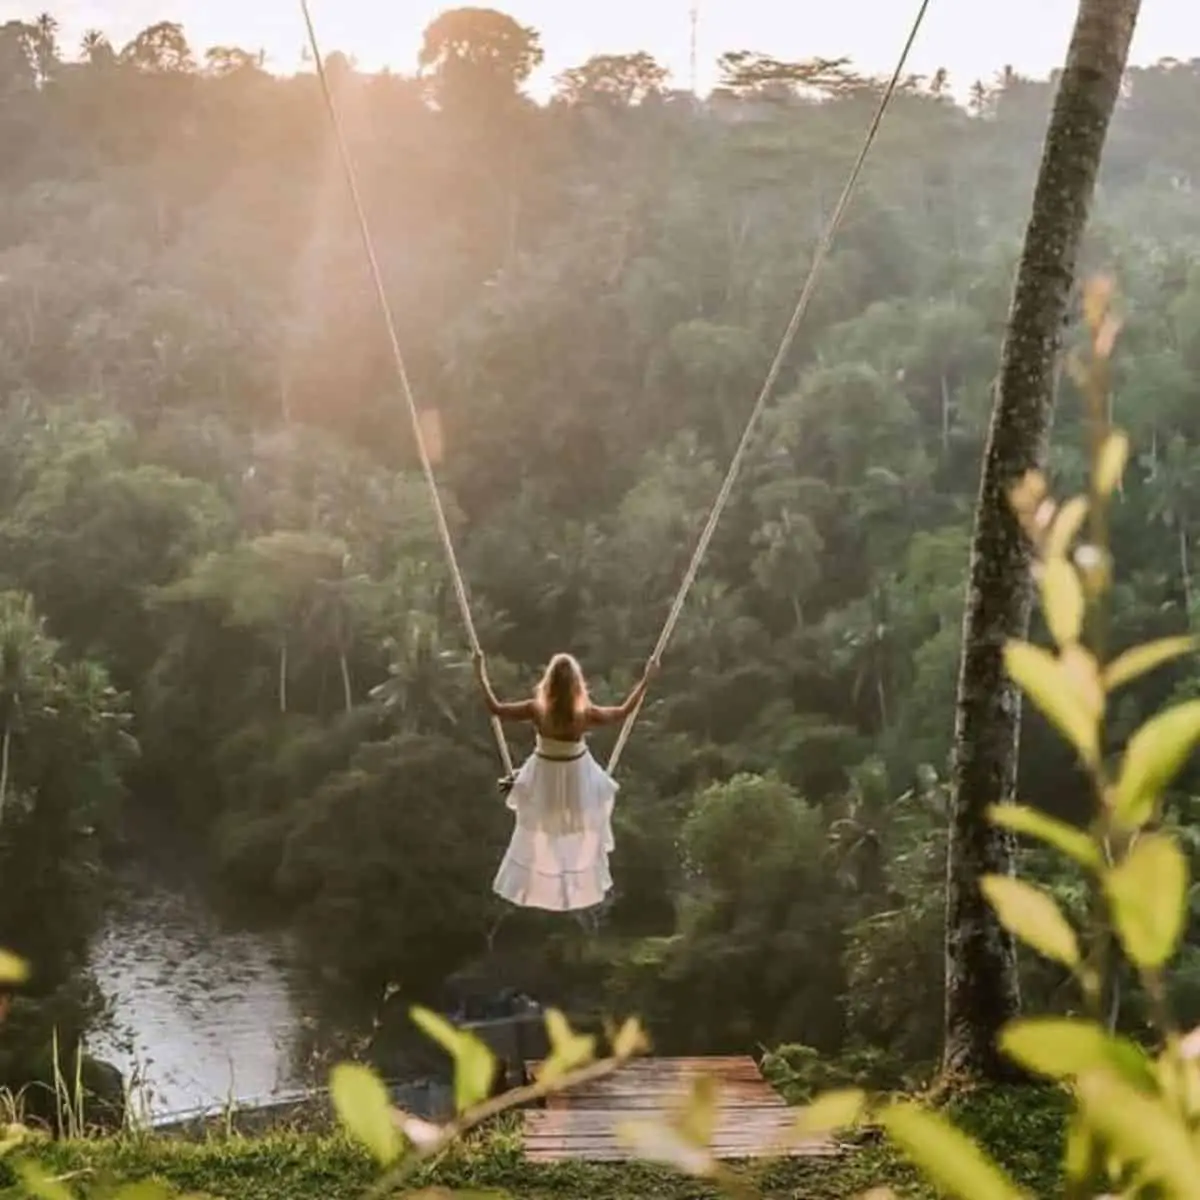 A woman in white dress riding in Zen Hideaway’s swing without harness with a forest and river view in front